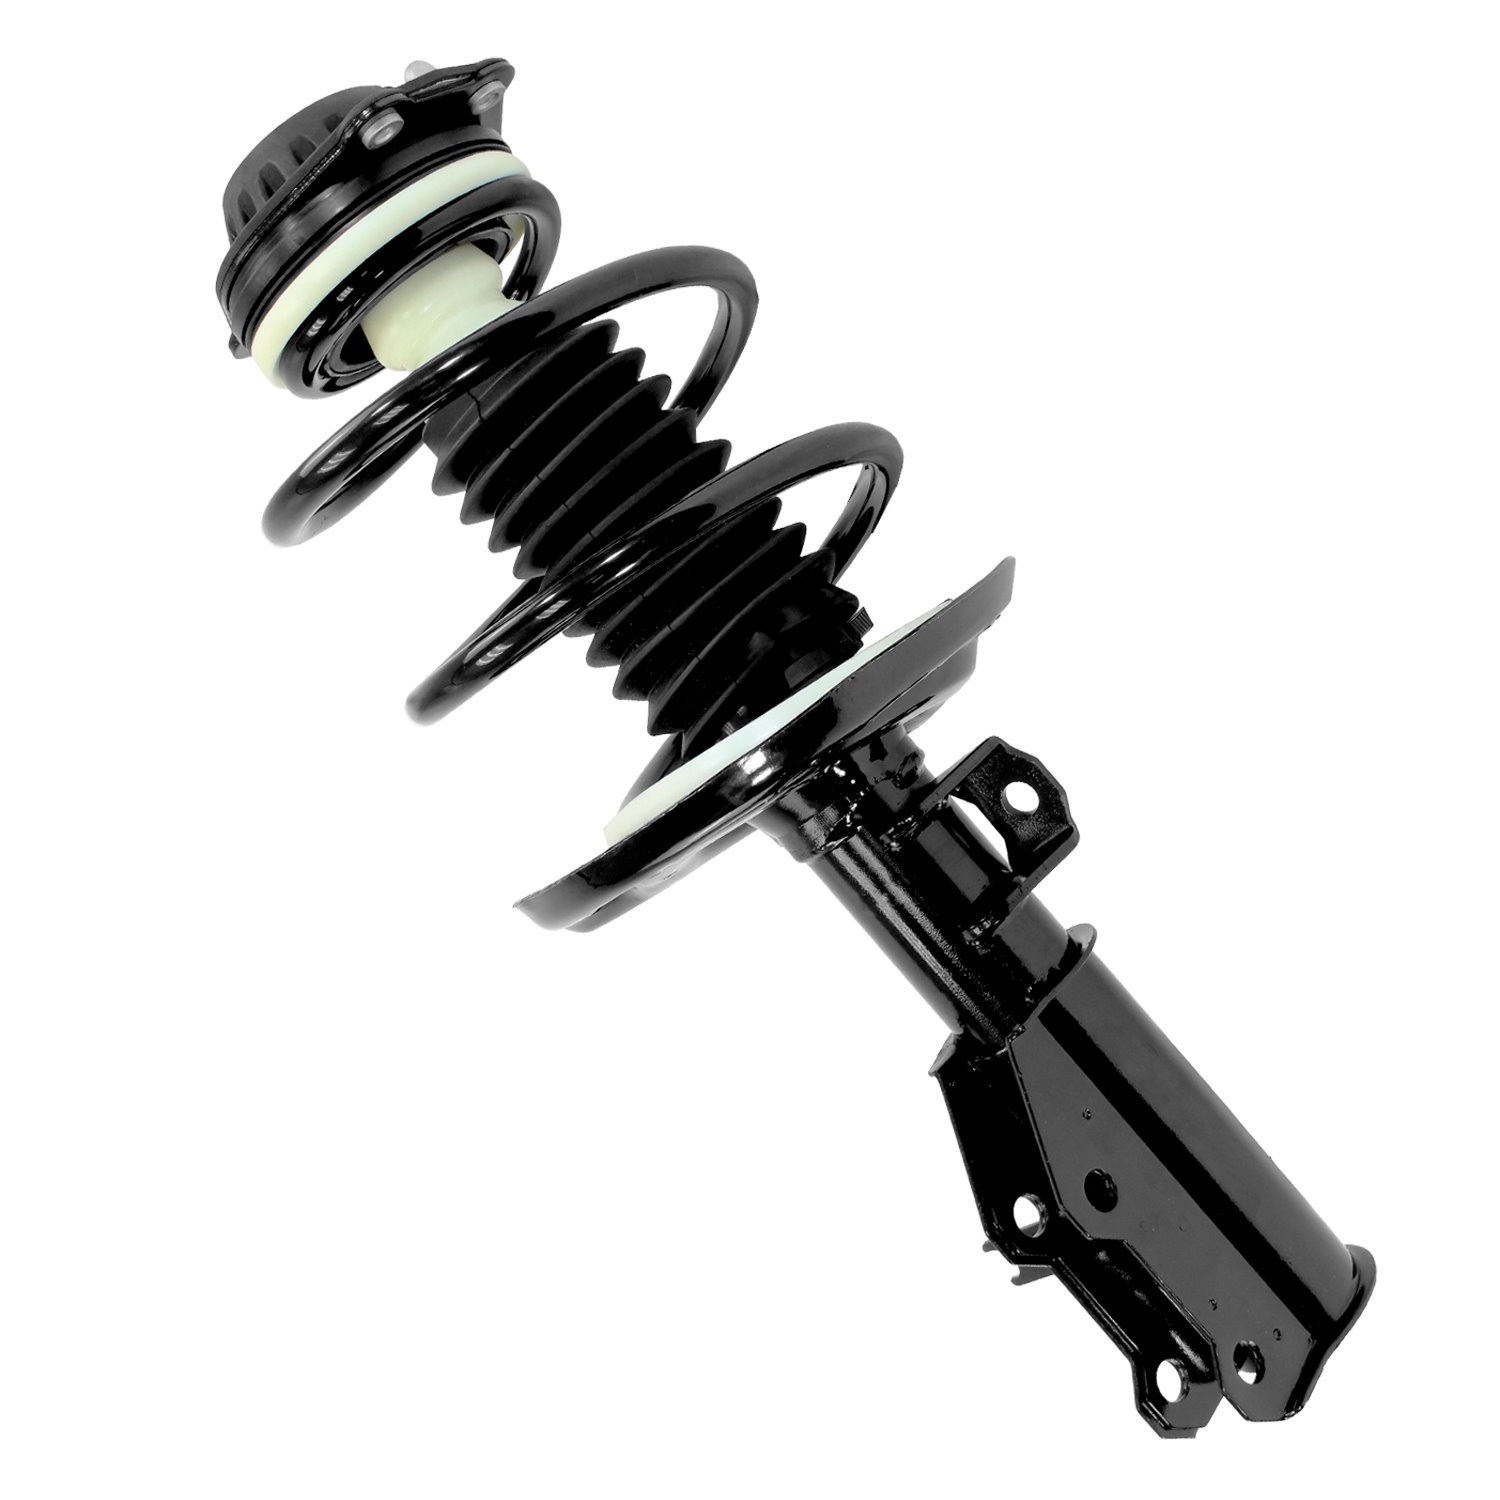 13512 Front Suspension Strut & Coil Spring Assemby Fits Select Chevy Malibu